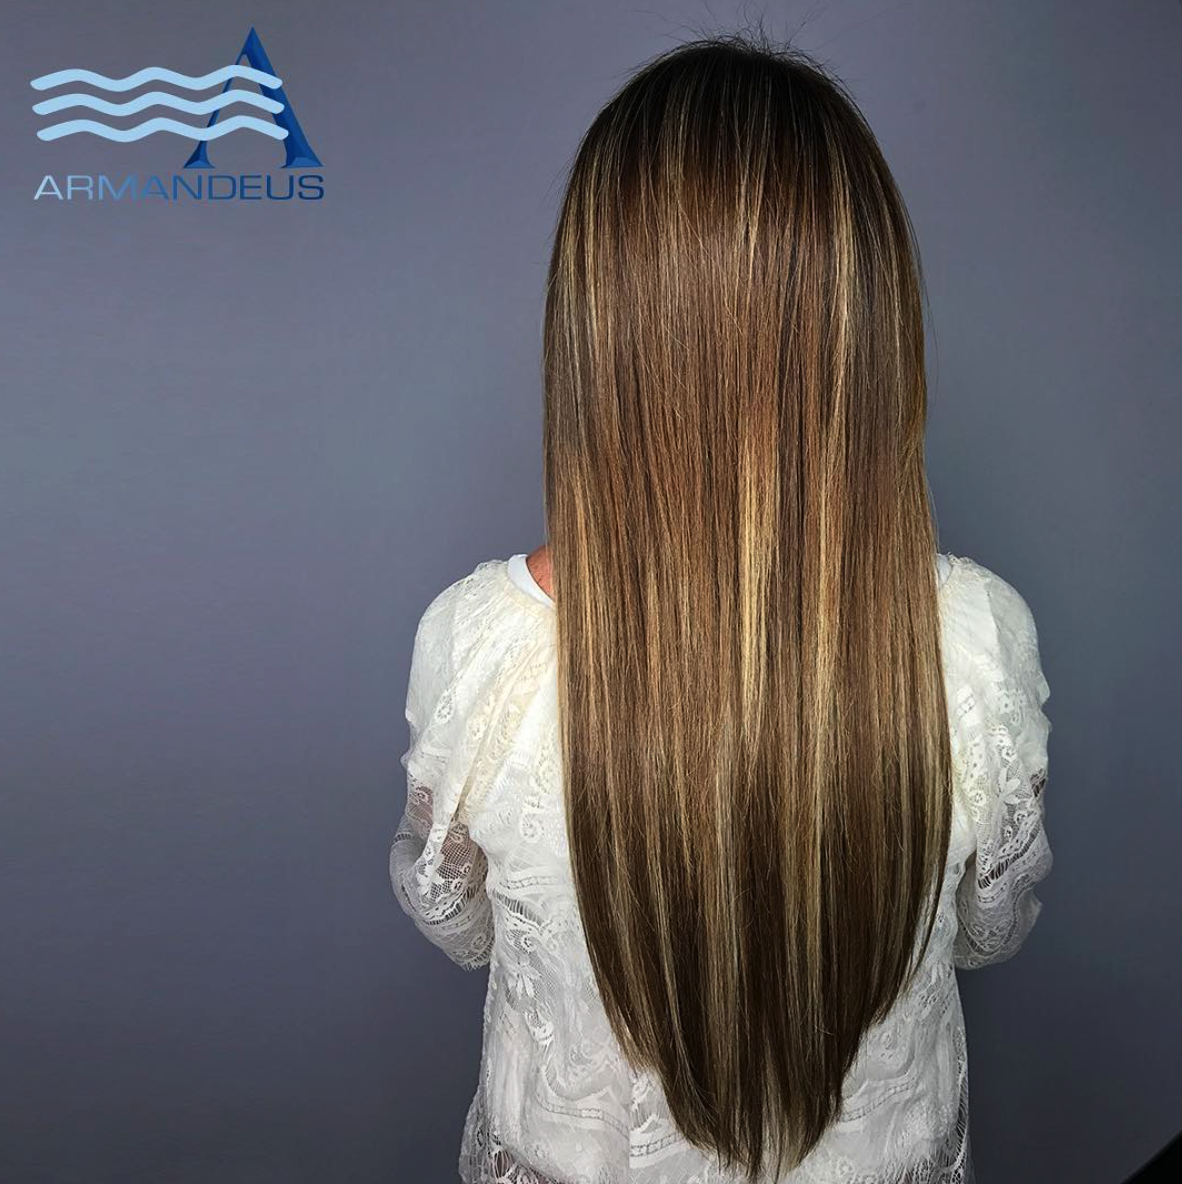 Hair color and extensions by Linda at Salon Armaneus Doral